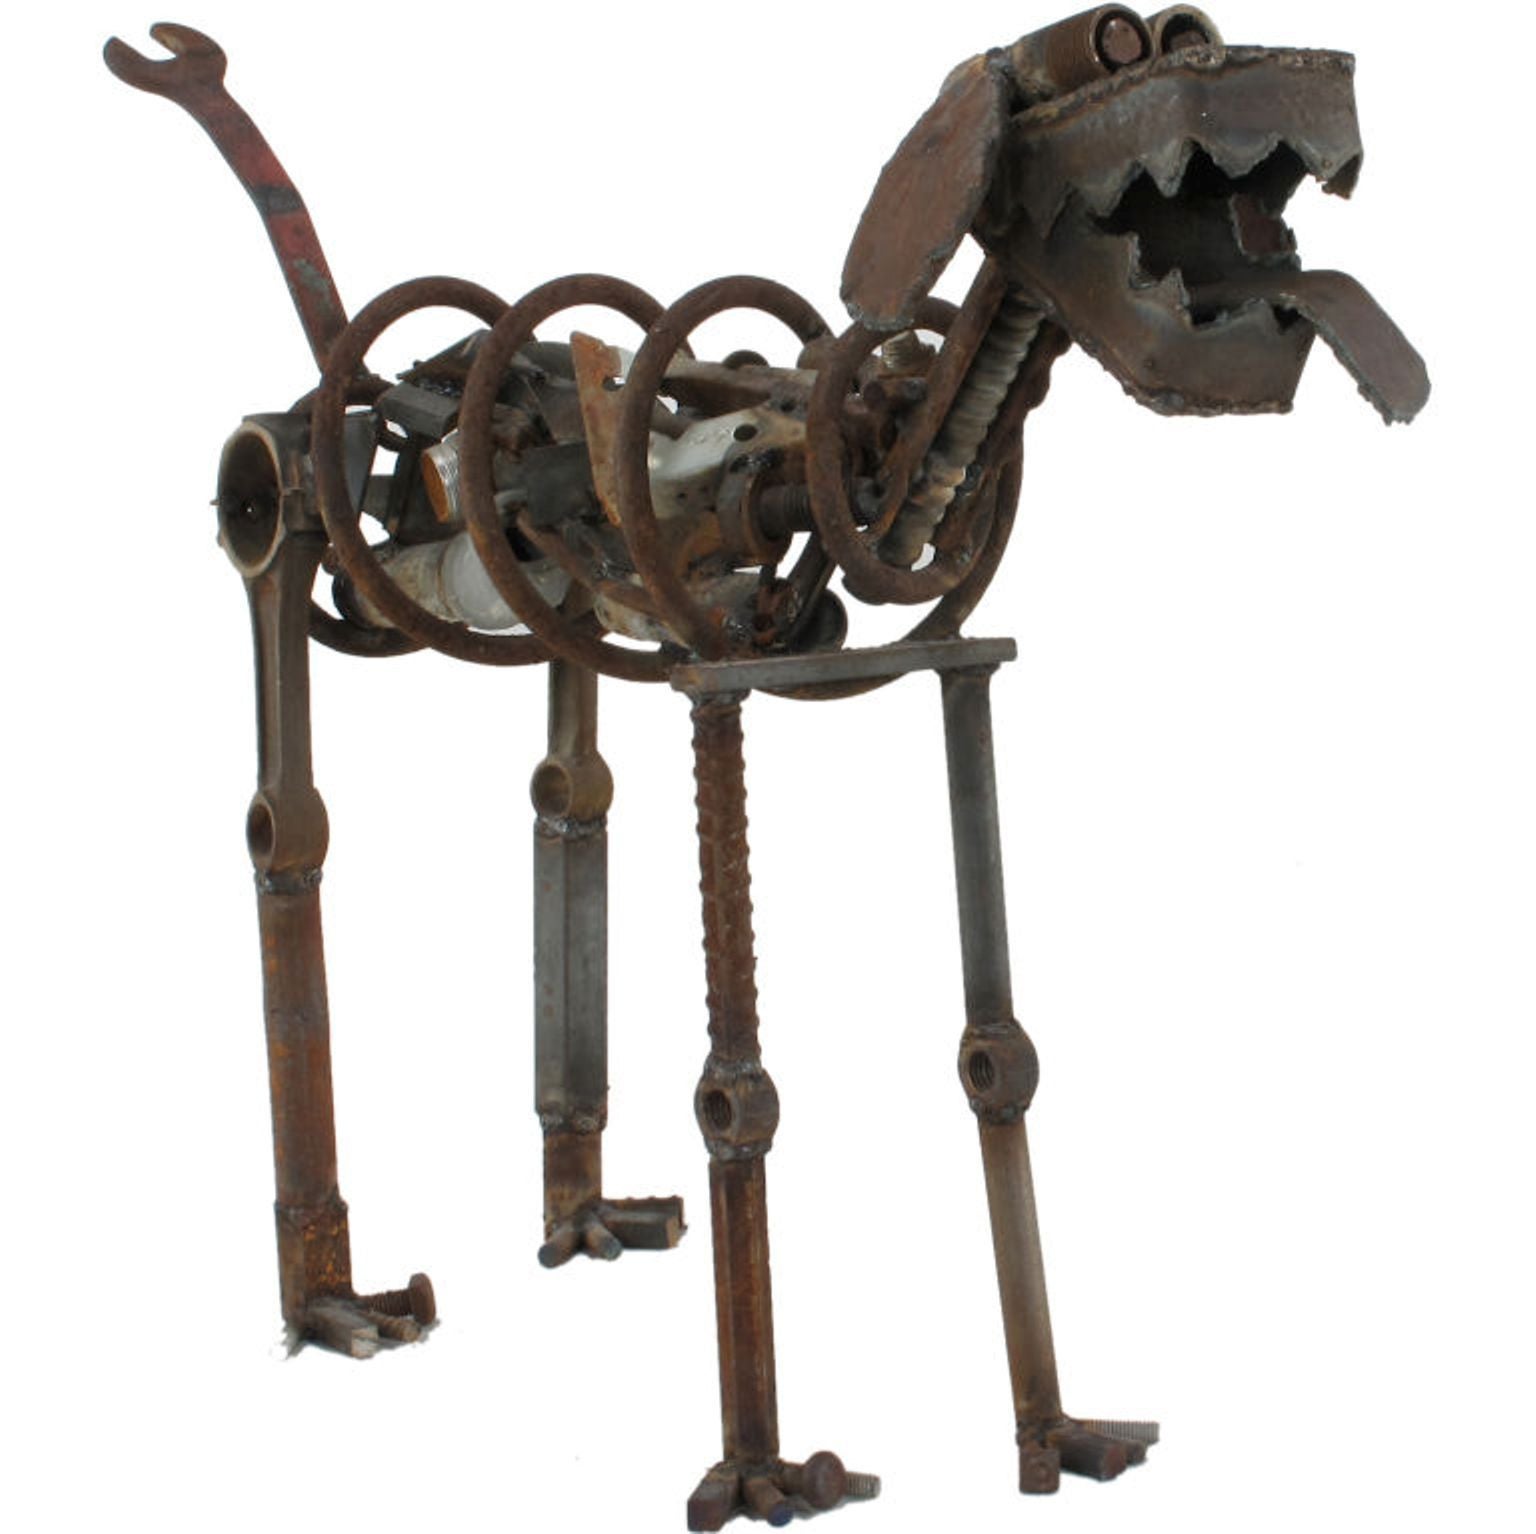 Life Sized Folk Art Welded Steel and Iron Dog Sculpture